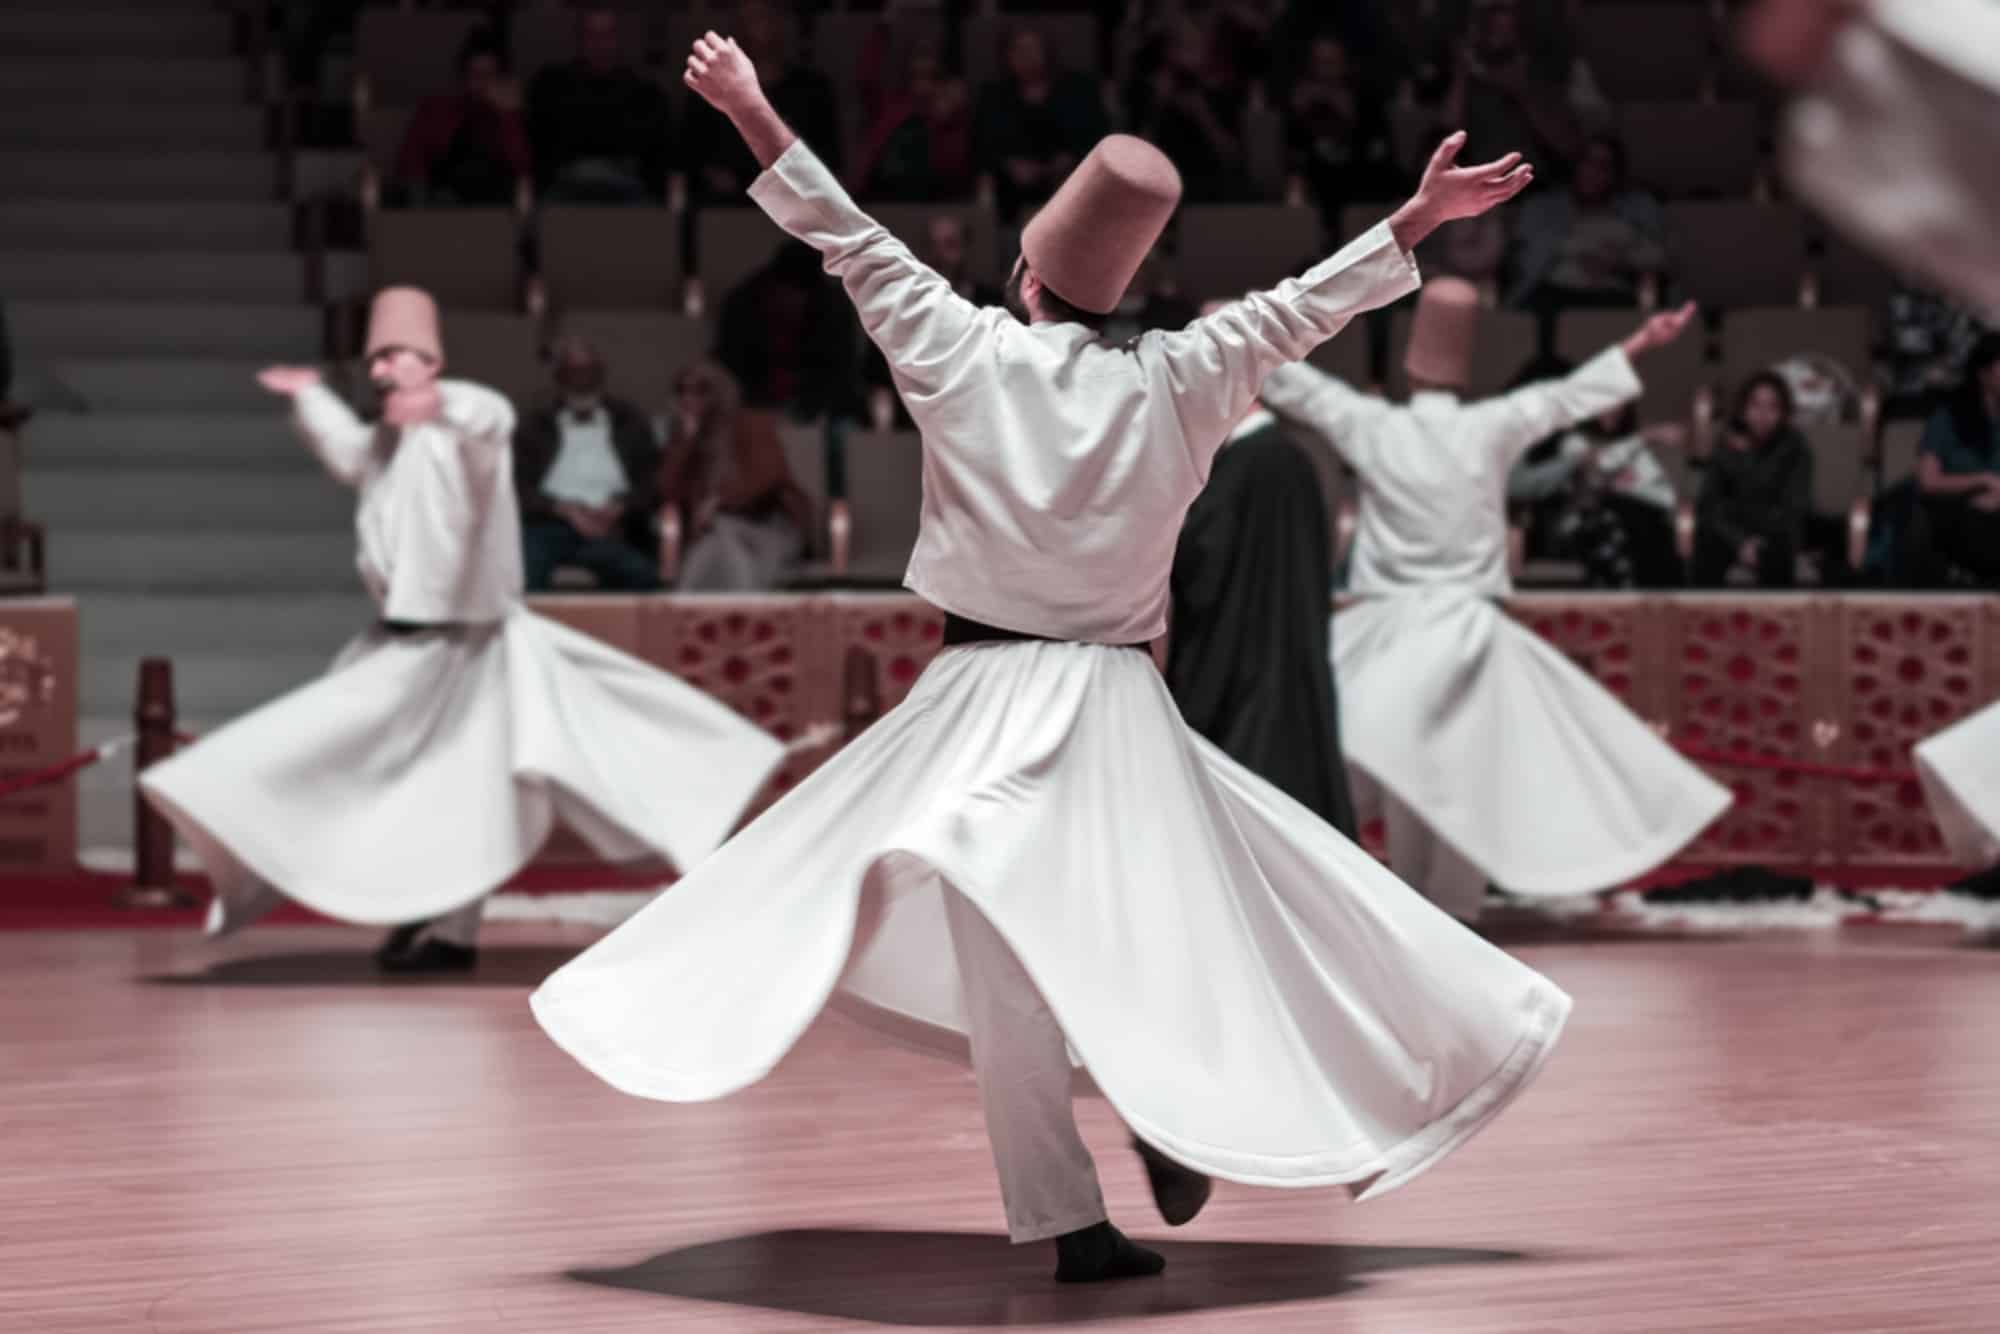 Unidentified whirling Dervishes